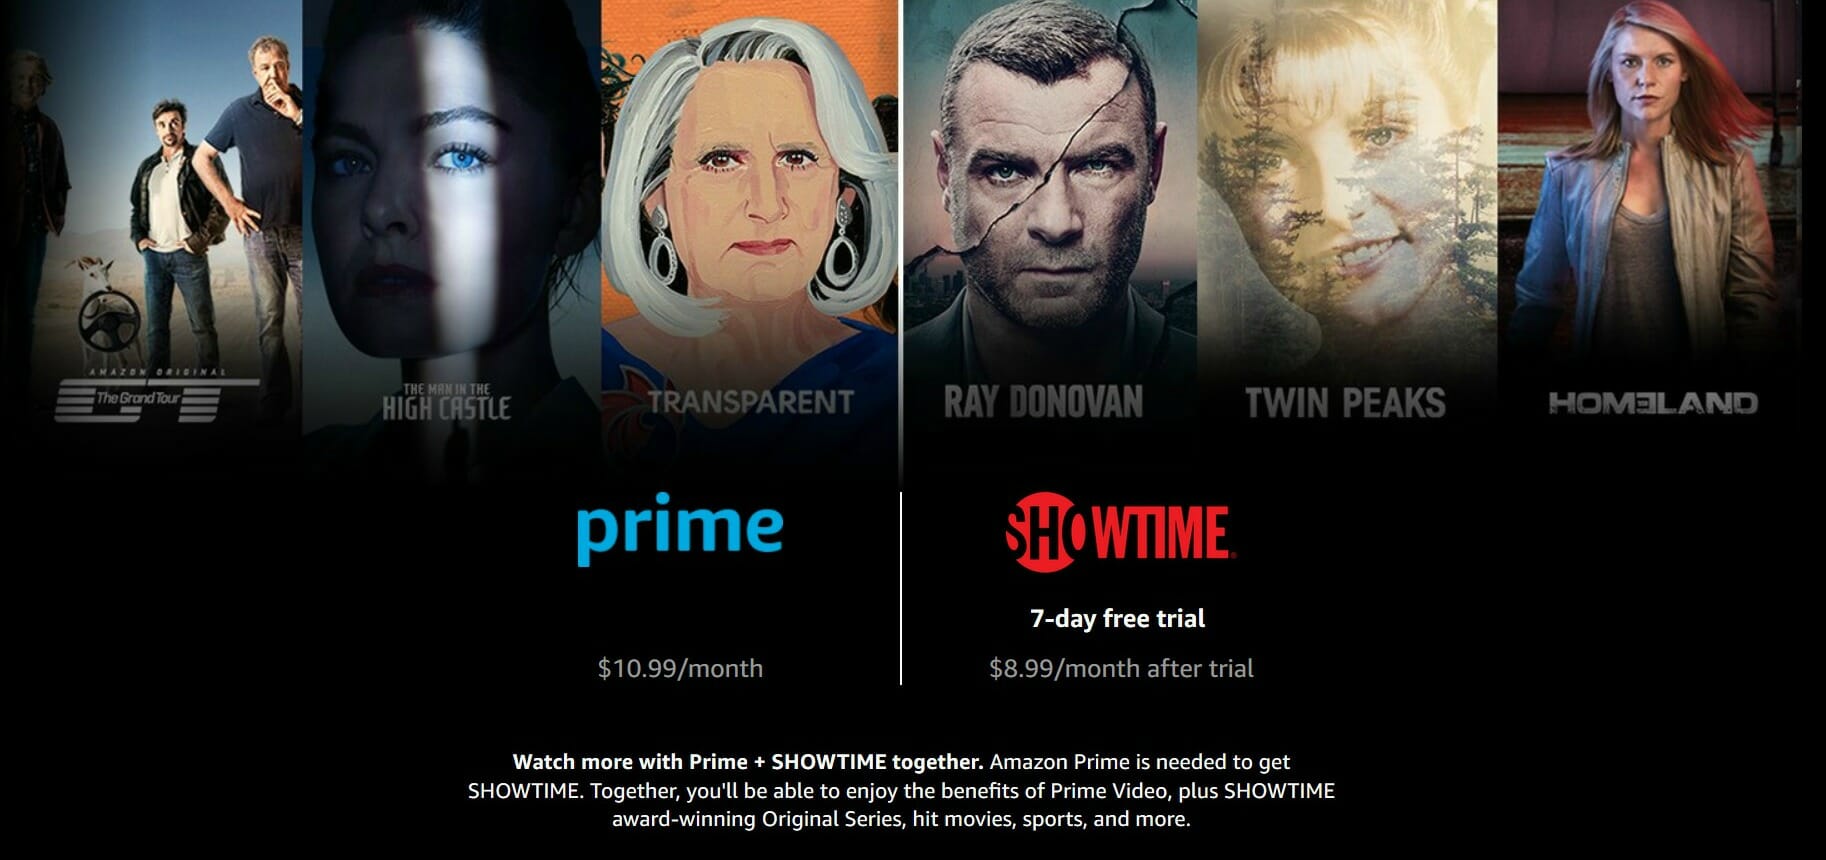 showtime ppv stream free